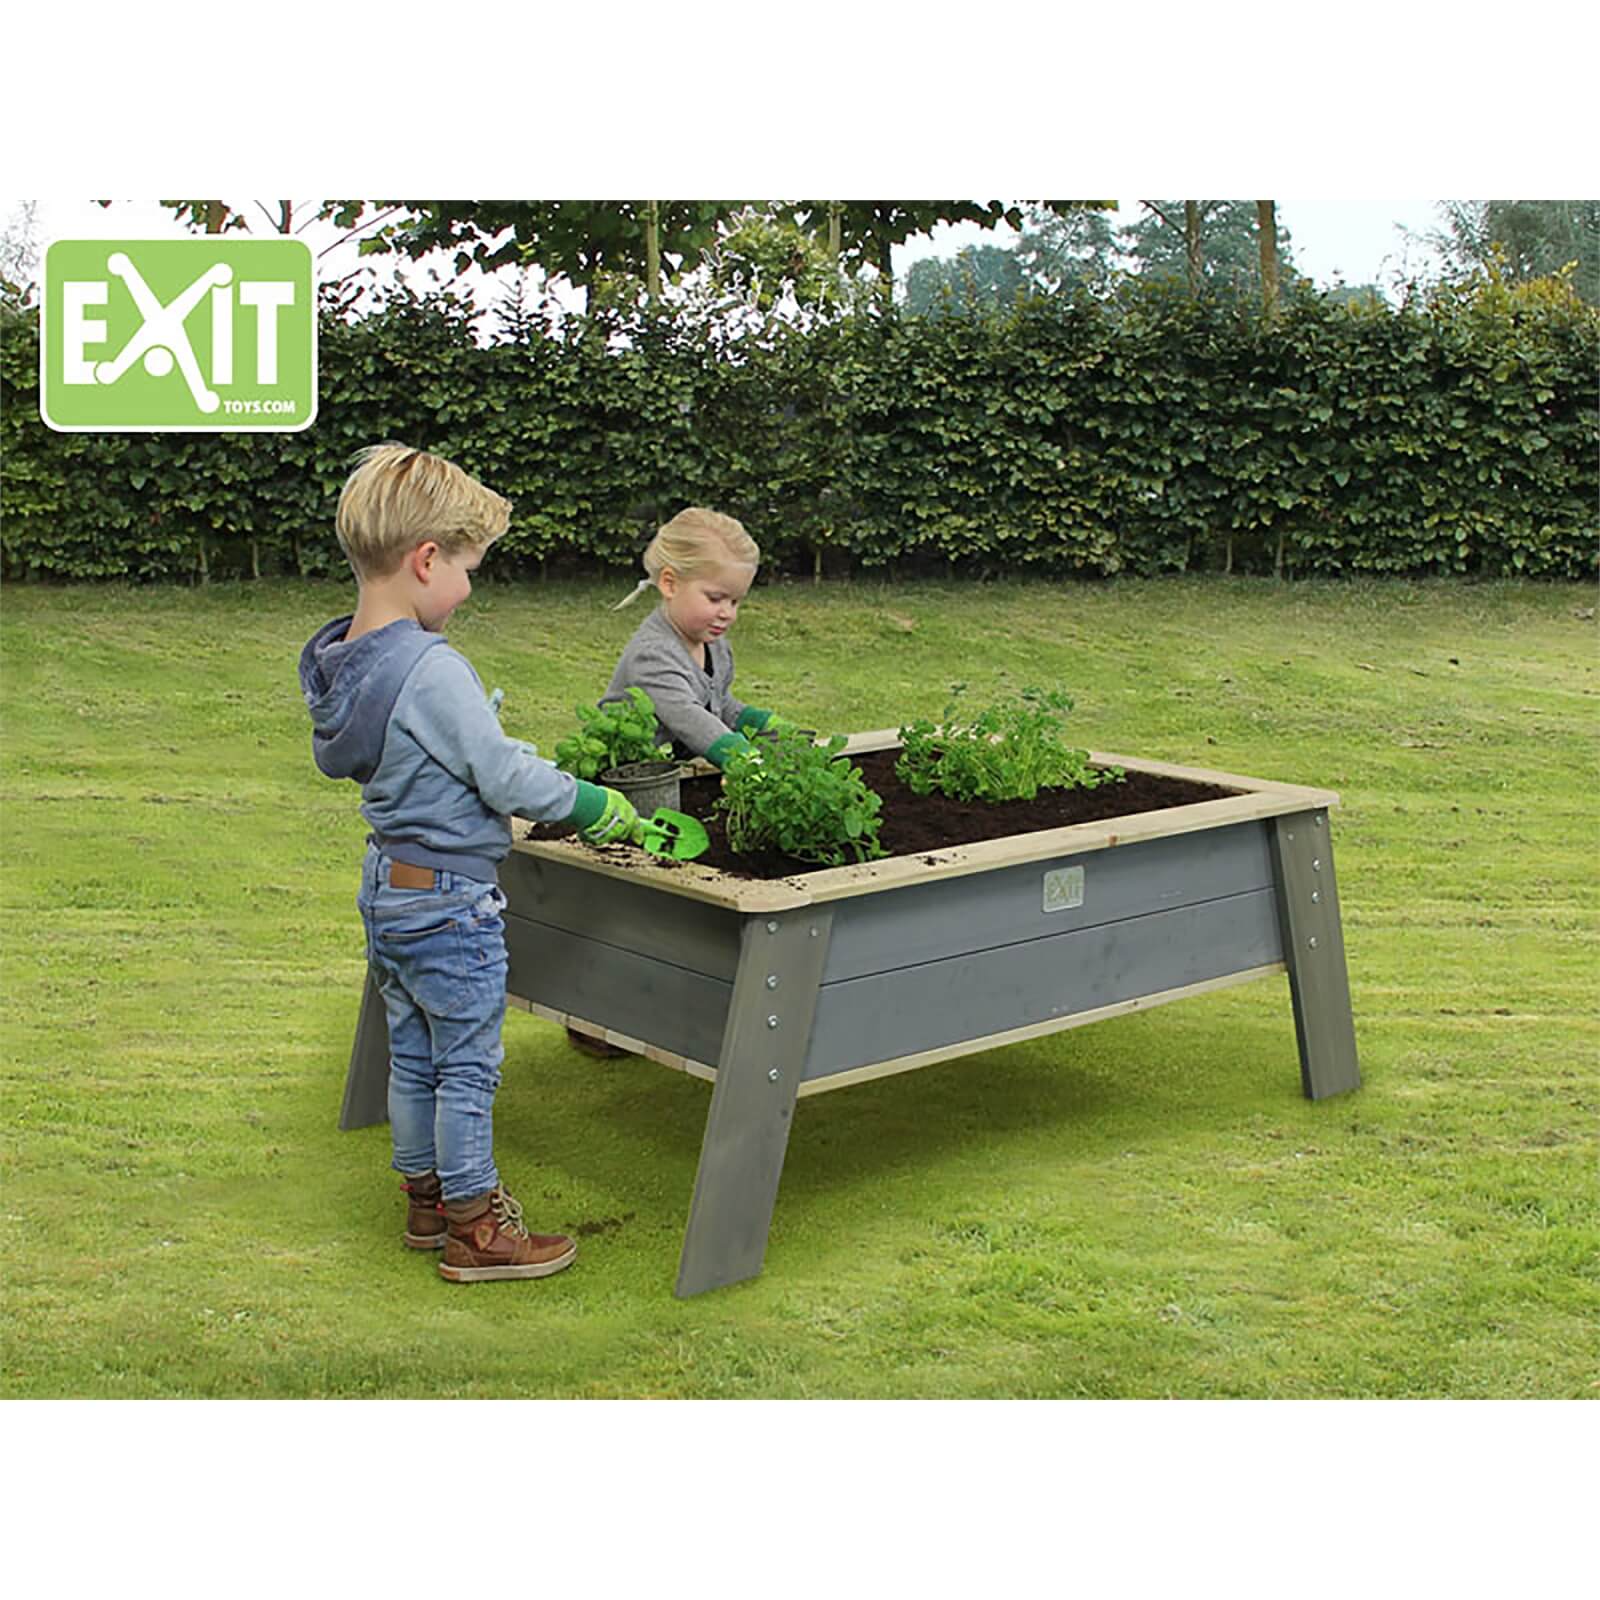 Exit Aksent Kids Planter Table Xl Deluxe